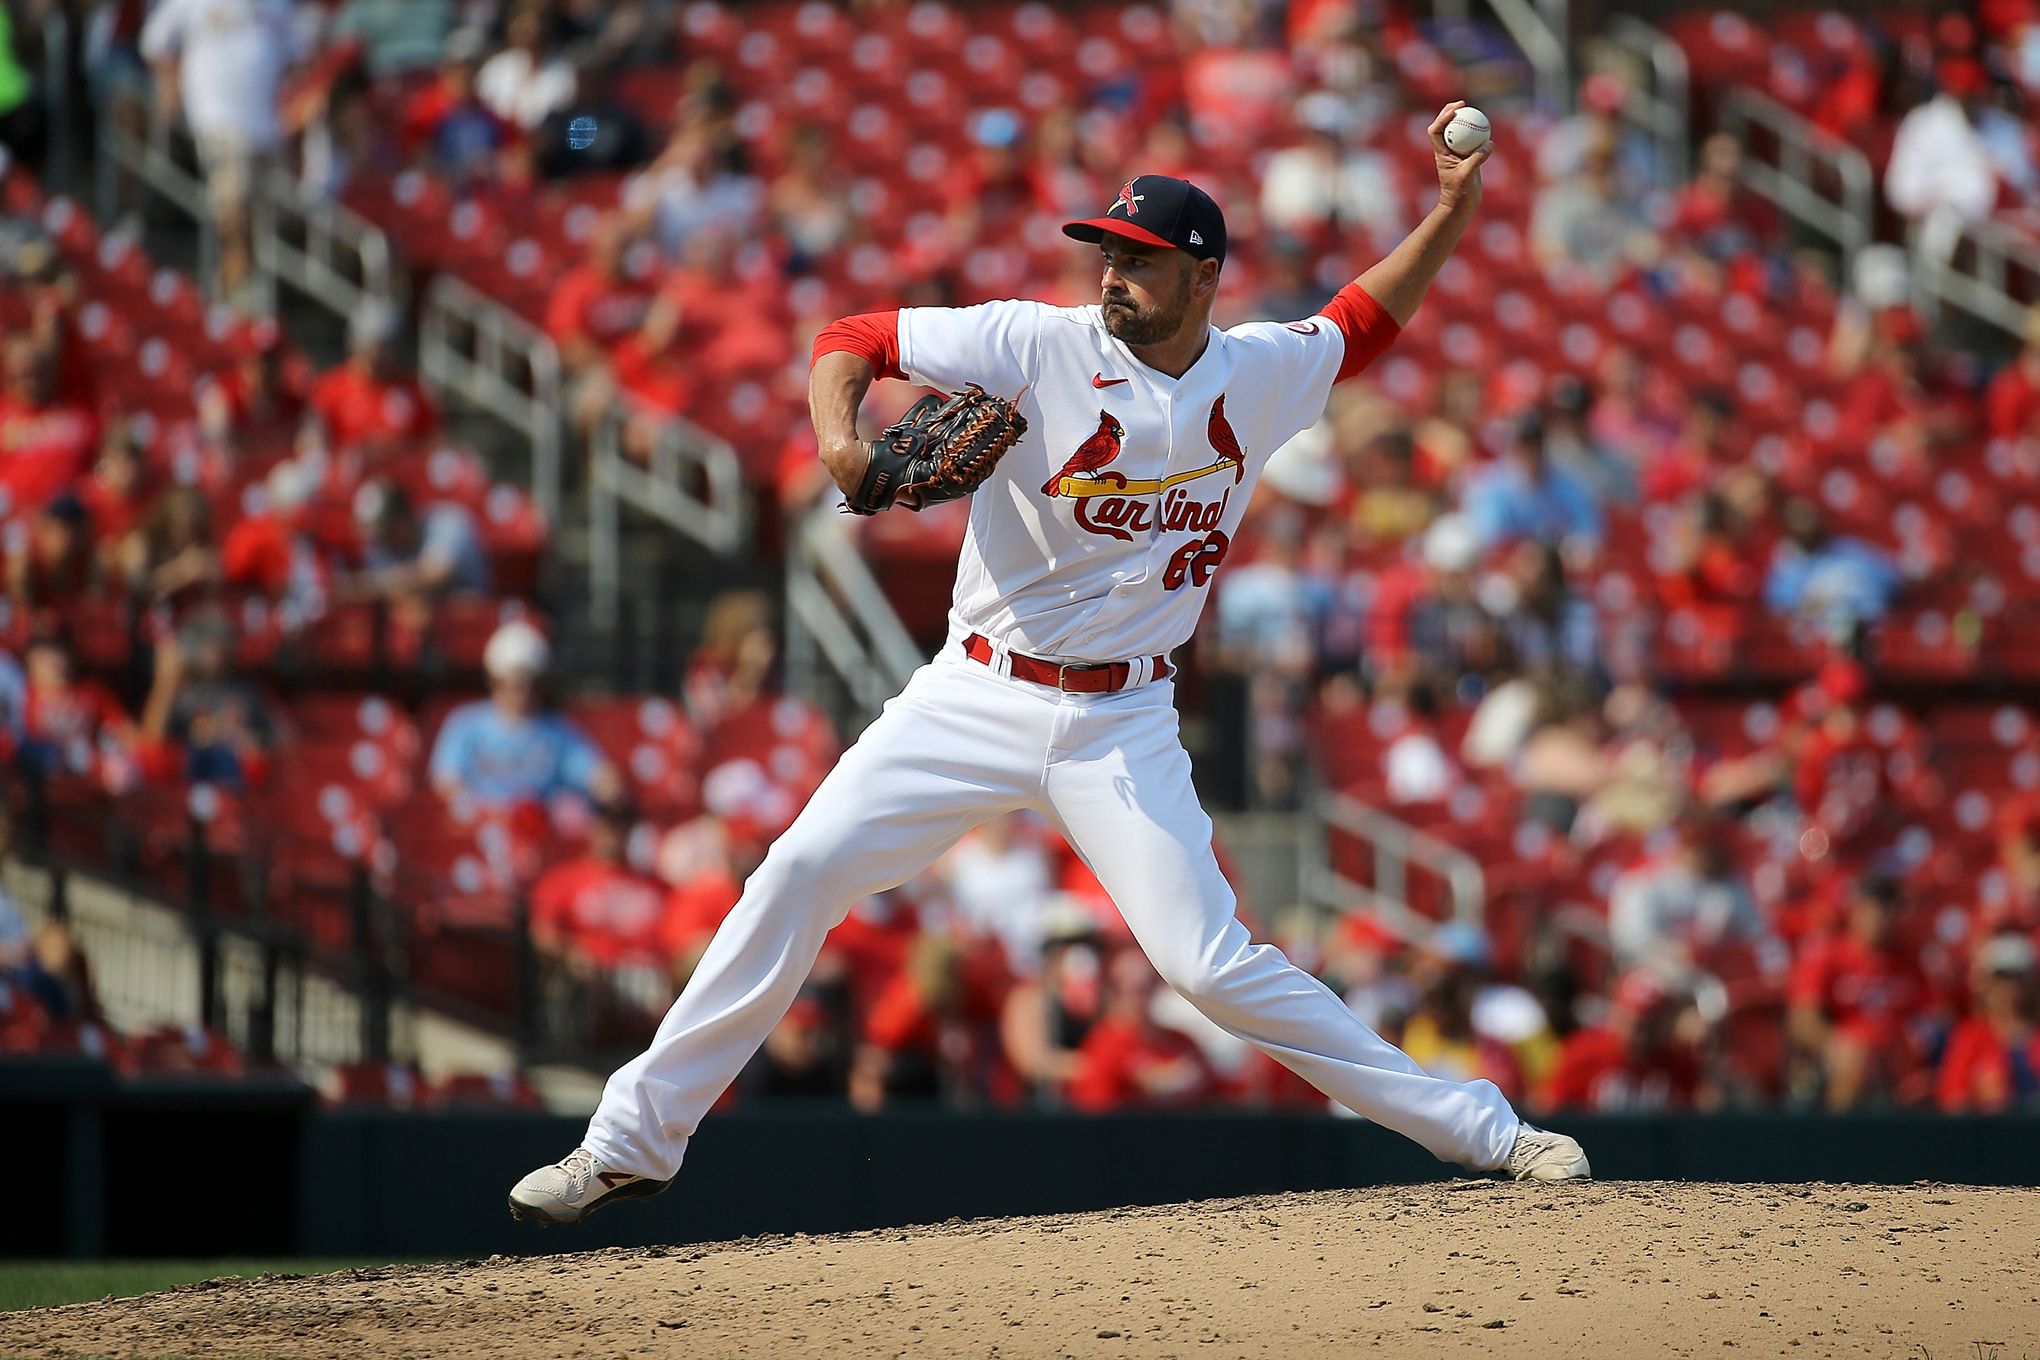 Cardinals reliever Giovanny Gallegos will race the clock this year